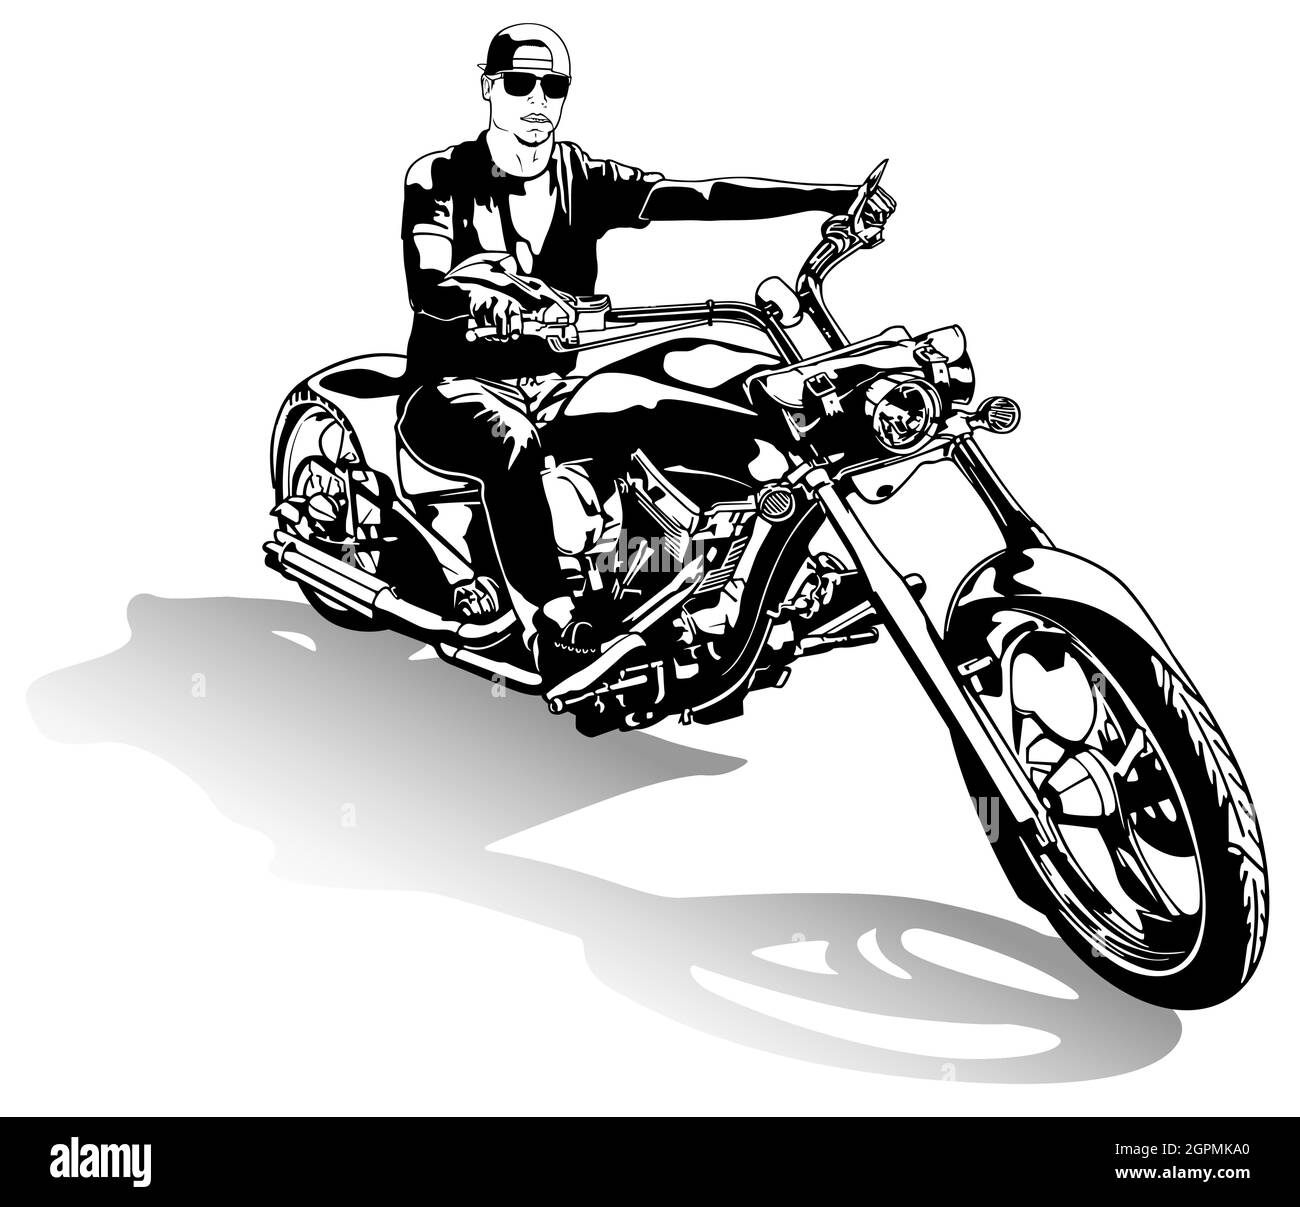 Motorcyclist on Motorcycle Drawing Stock Vector